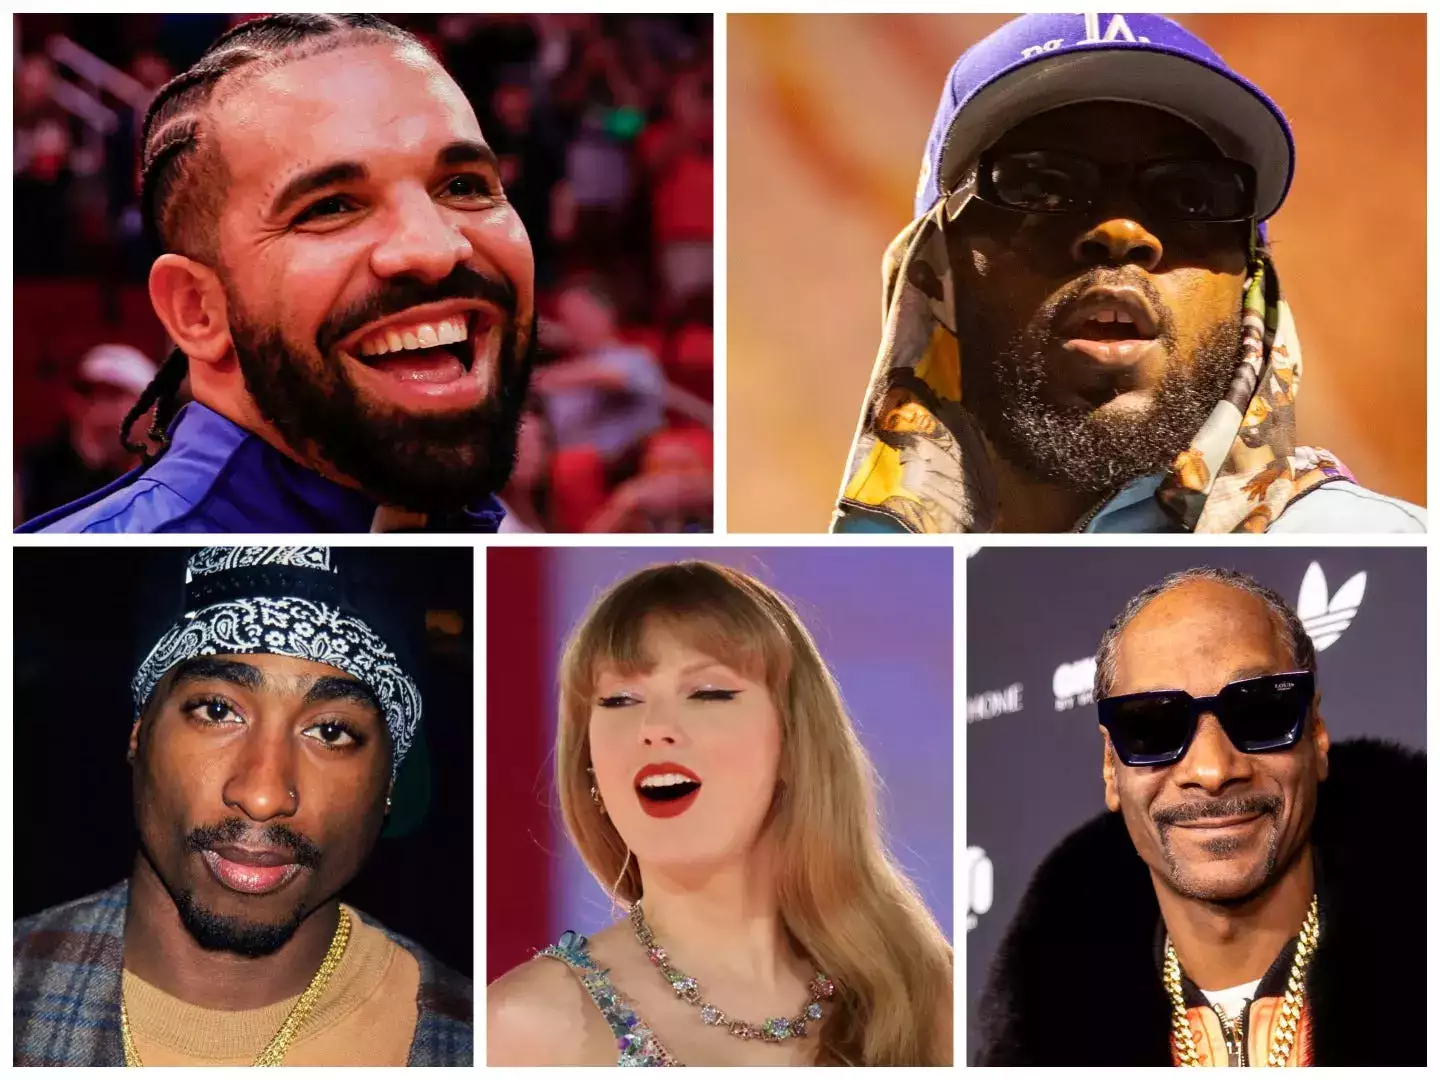 Taylor Swift, Tupac, and Snoop Dogg are now somehow part of the weekslong rap beef between Drake and Kendrick Lamar